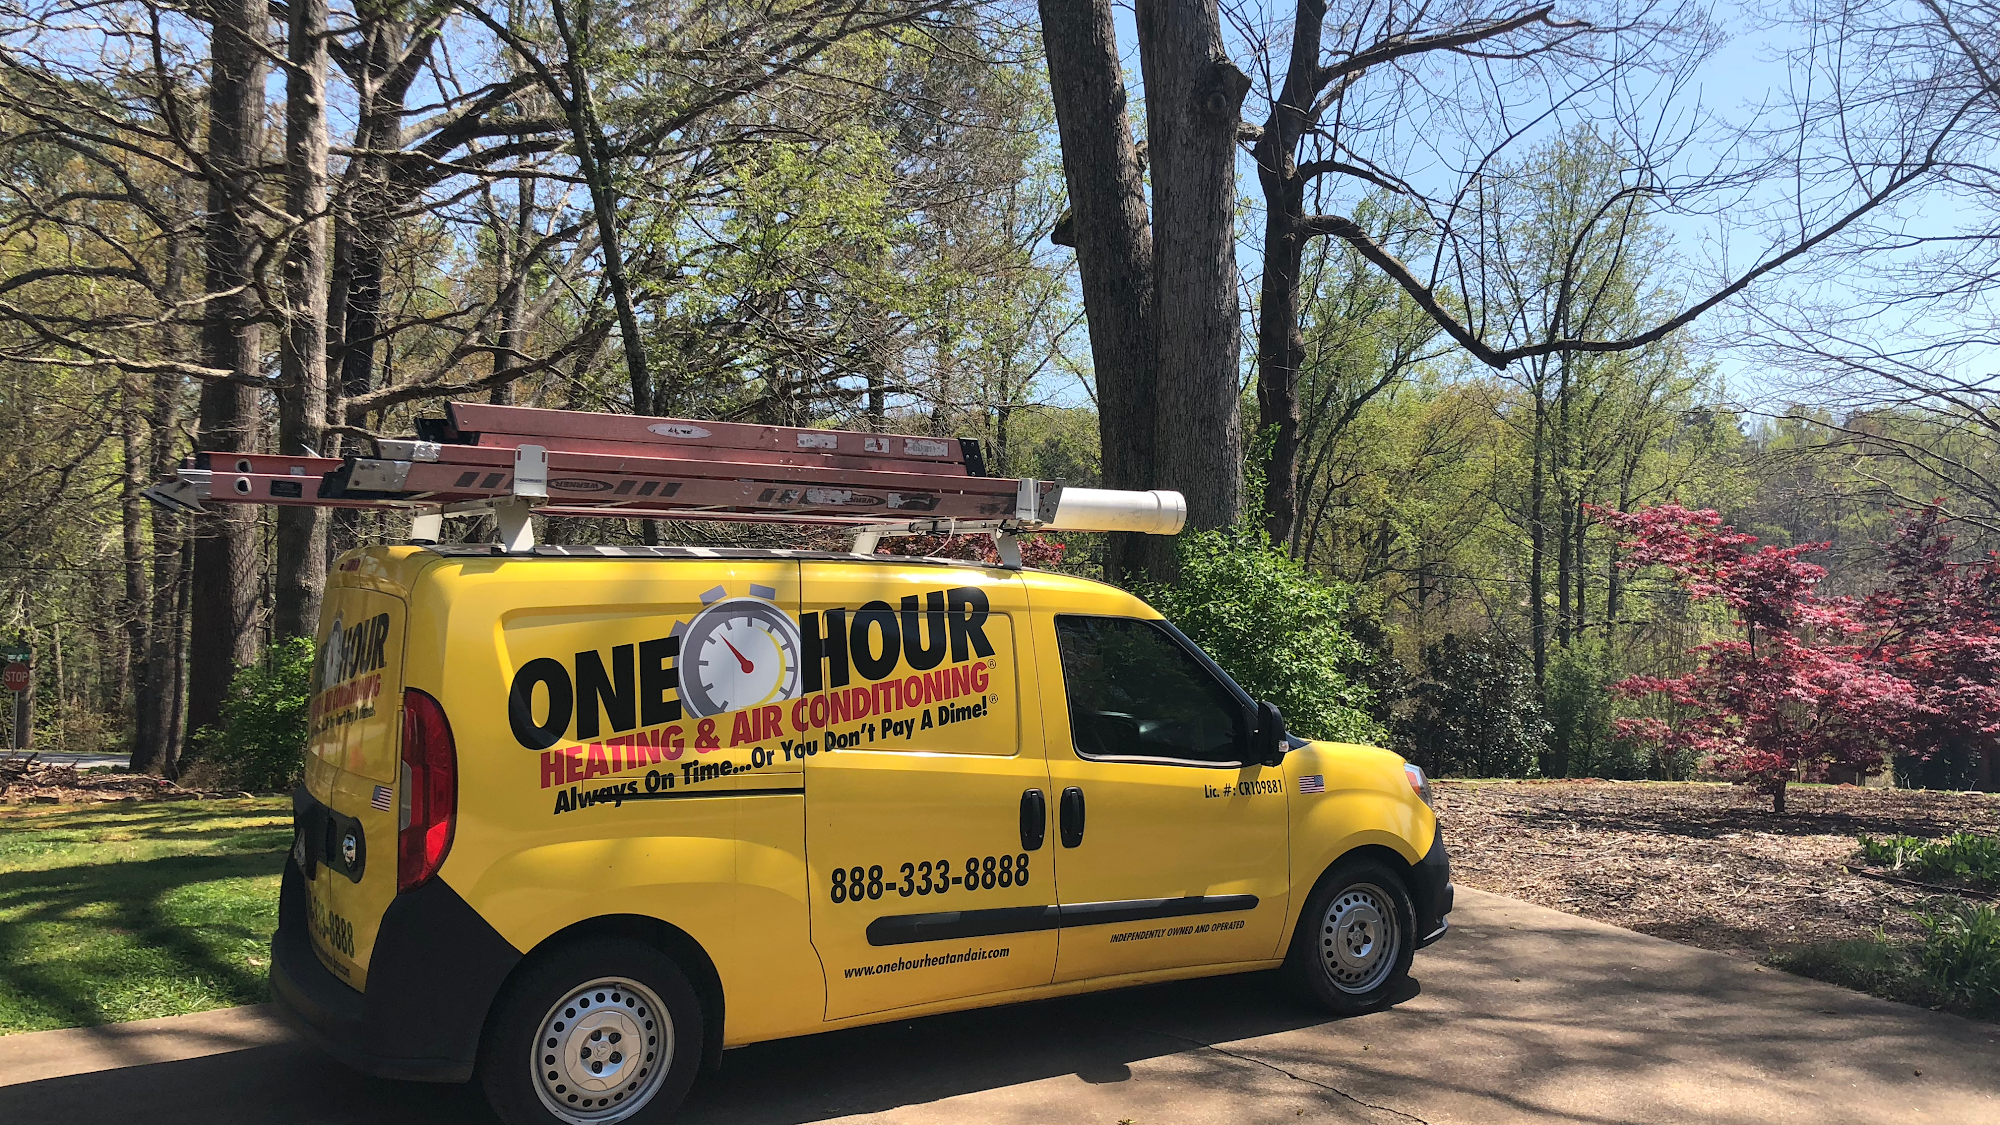 One Hour Heating & Air Conditioning of Atlanta